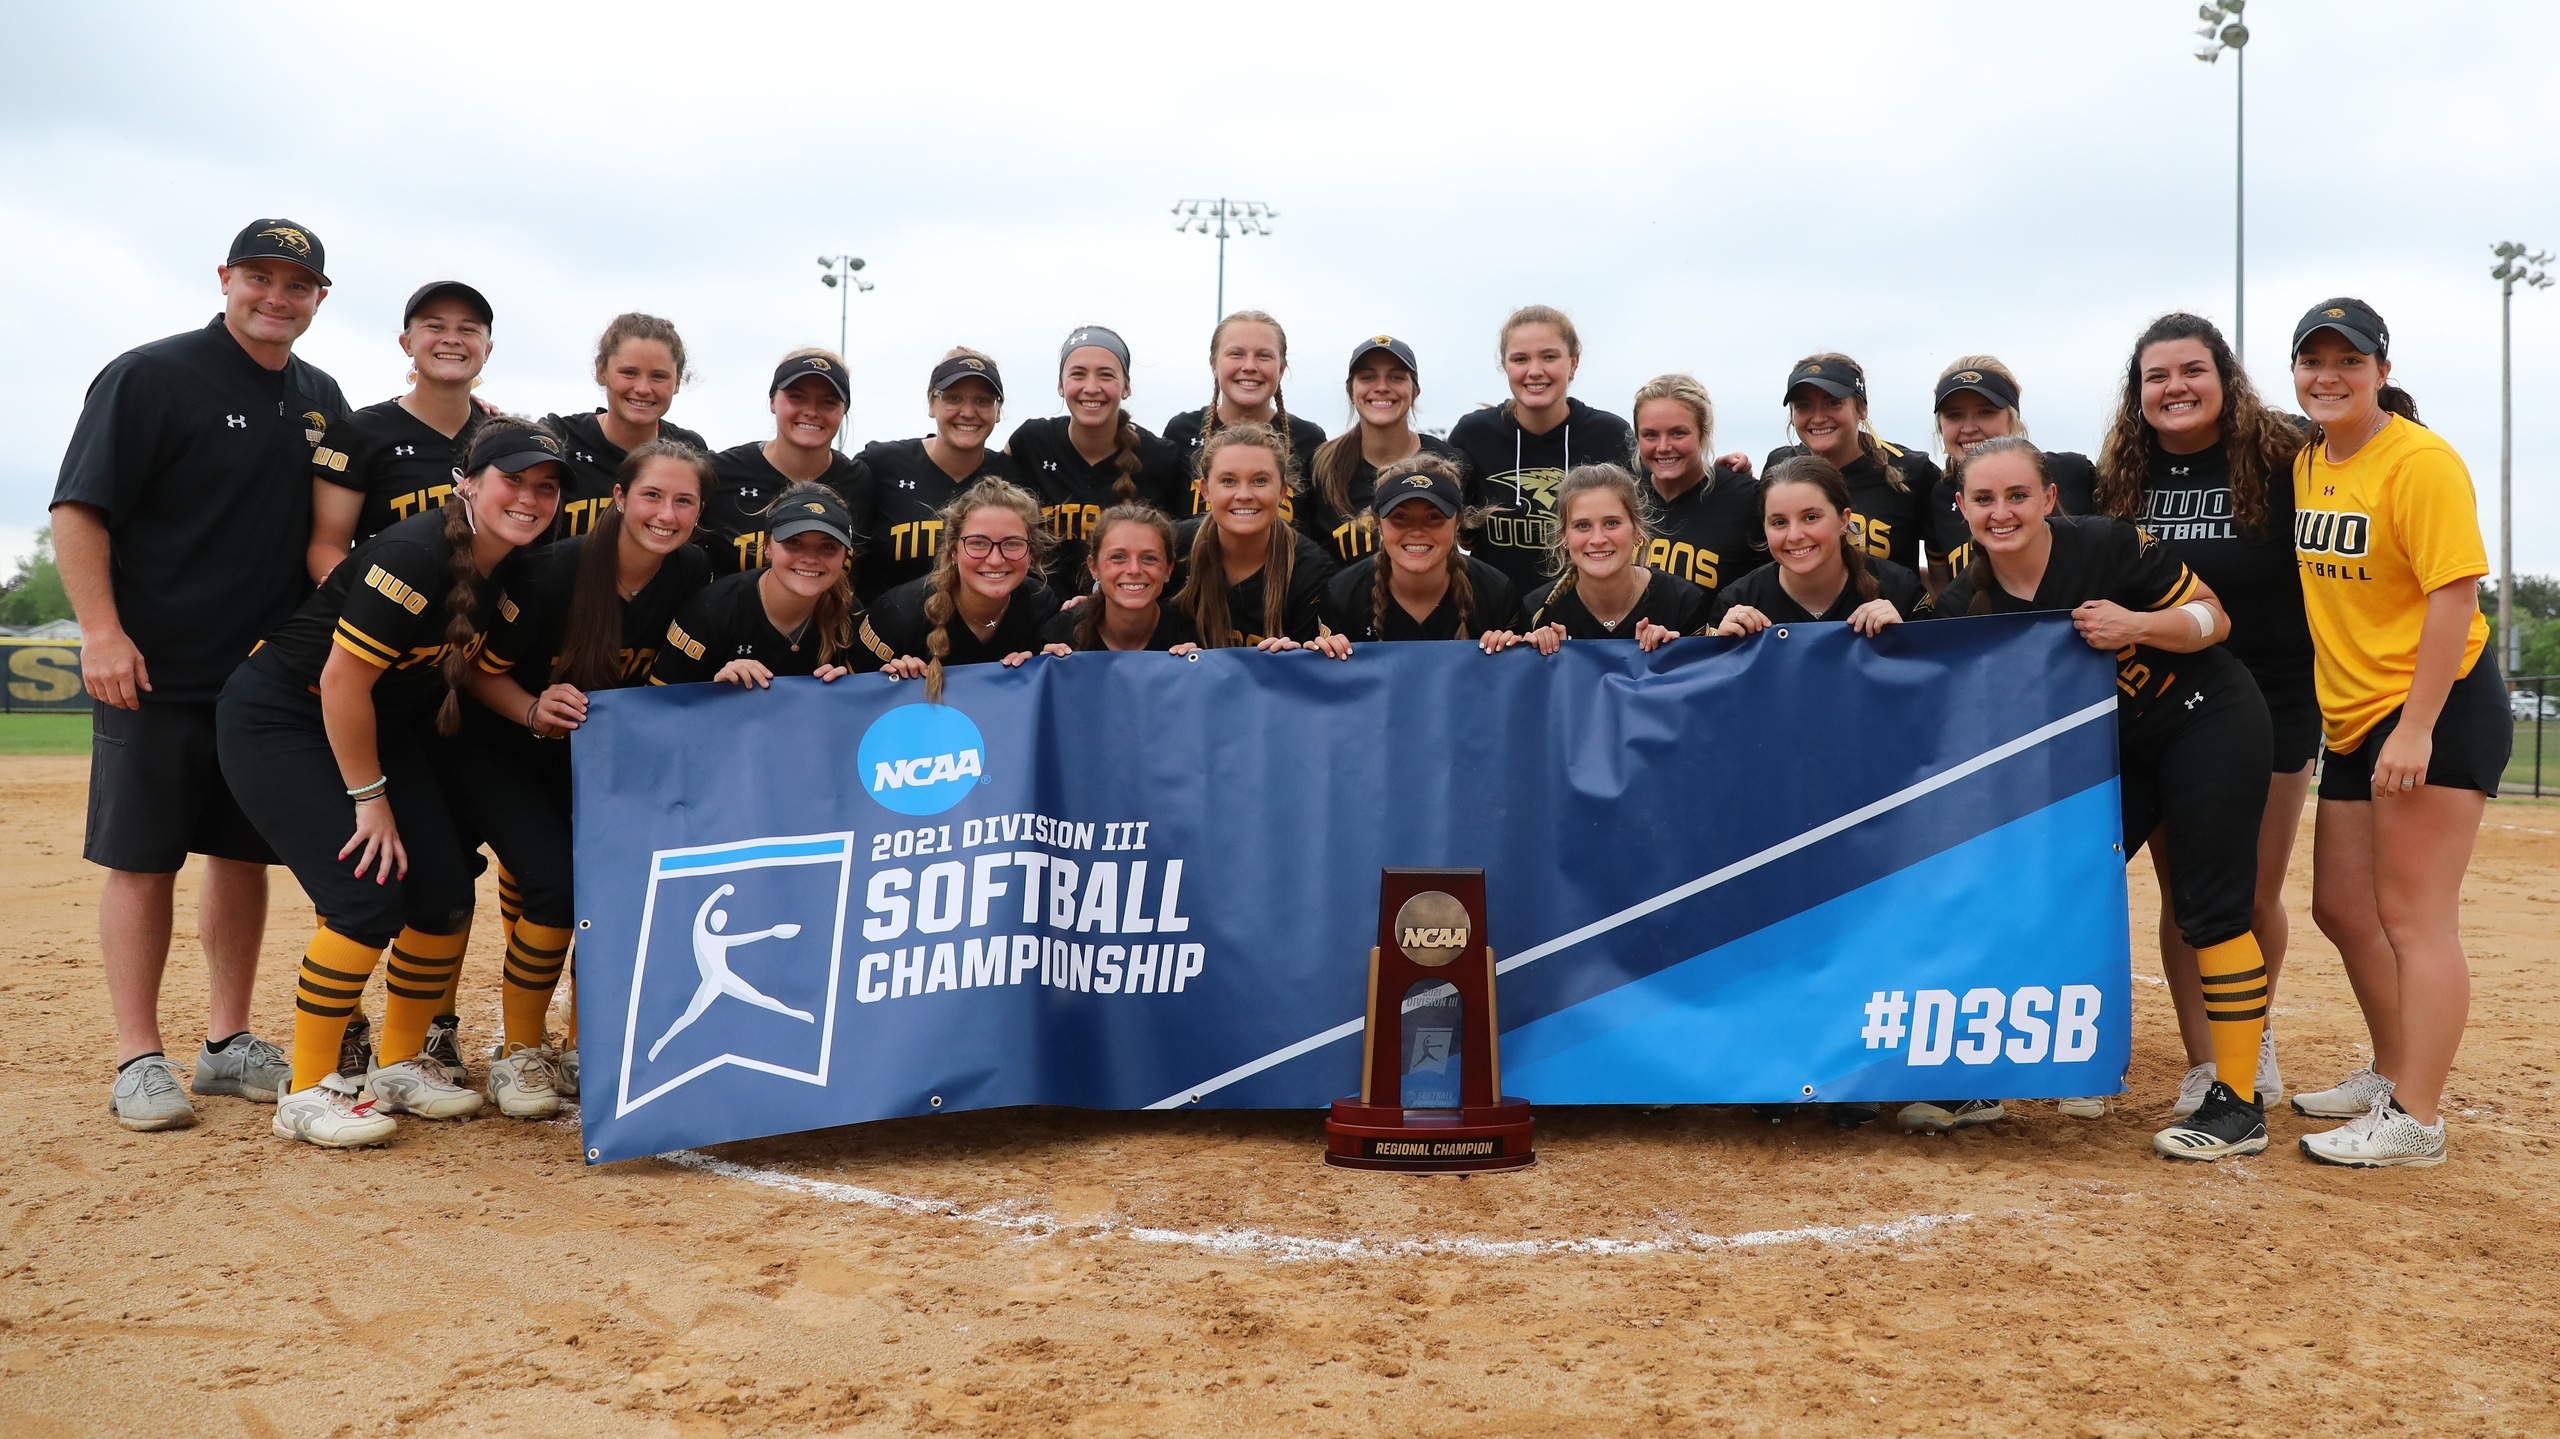 UW-Oshkosh is making its second NCAA Division III World Series appearance, with the other in 1988.